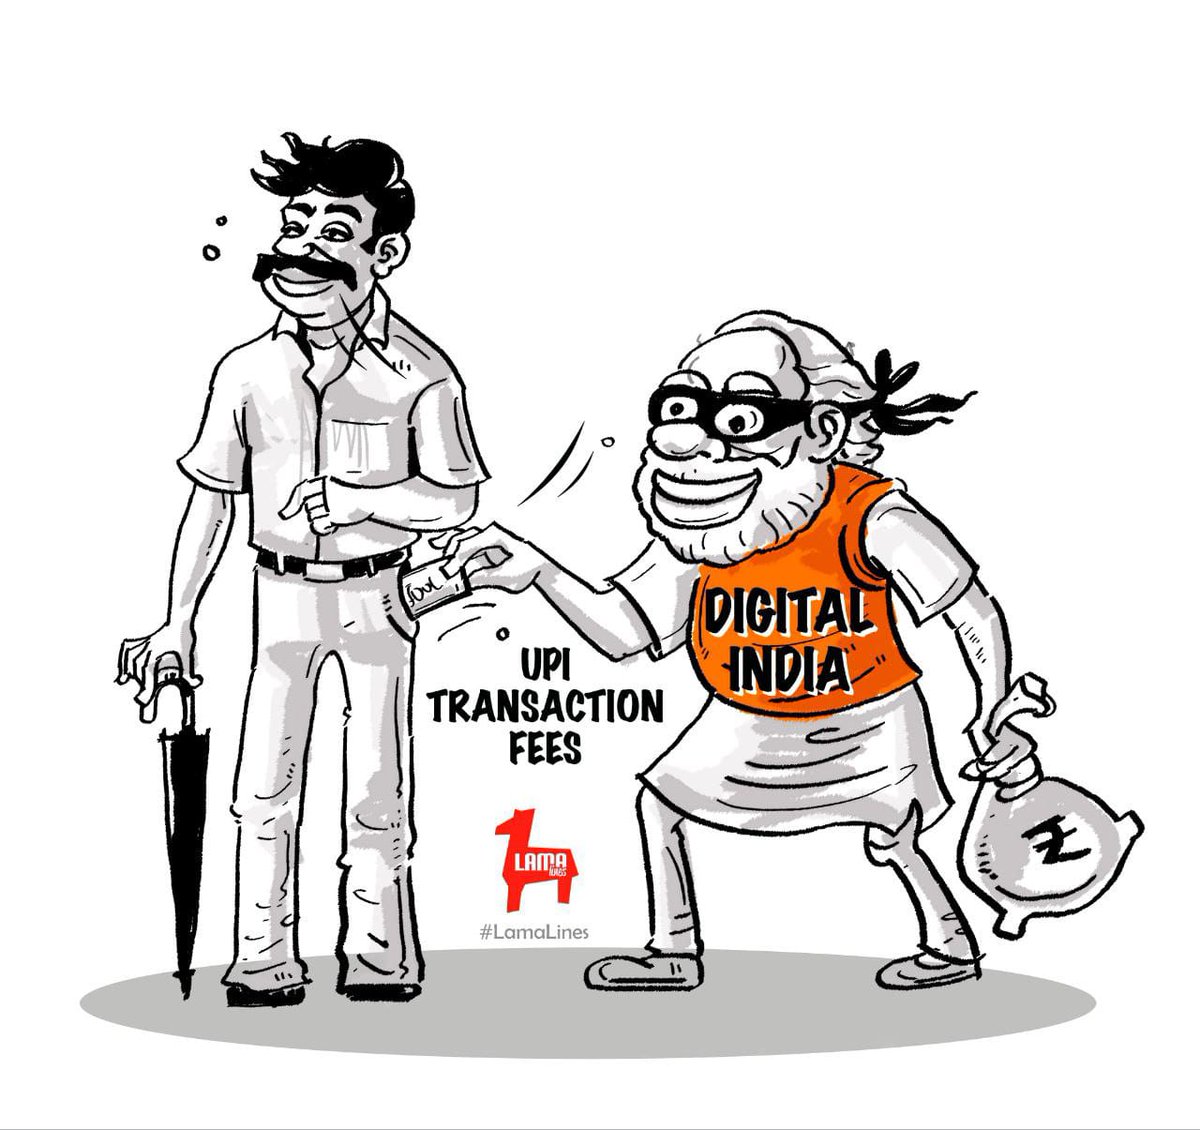 Digital #India!
But at the Cost of #Indian Citizens!
#BJP #Modi #UPIcharges #UPIPayments #UPITransactions #UPI 

#LamaLines